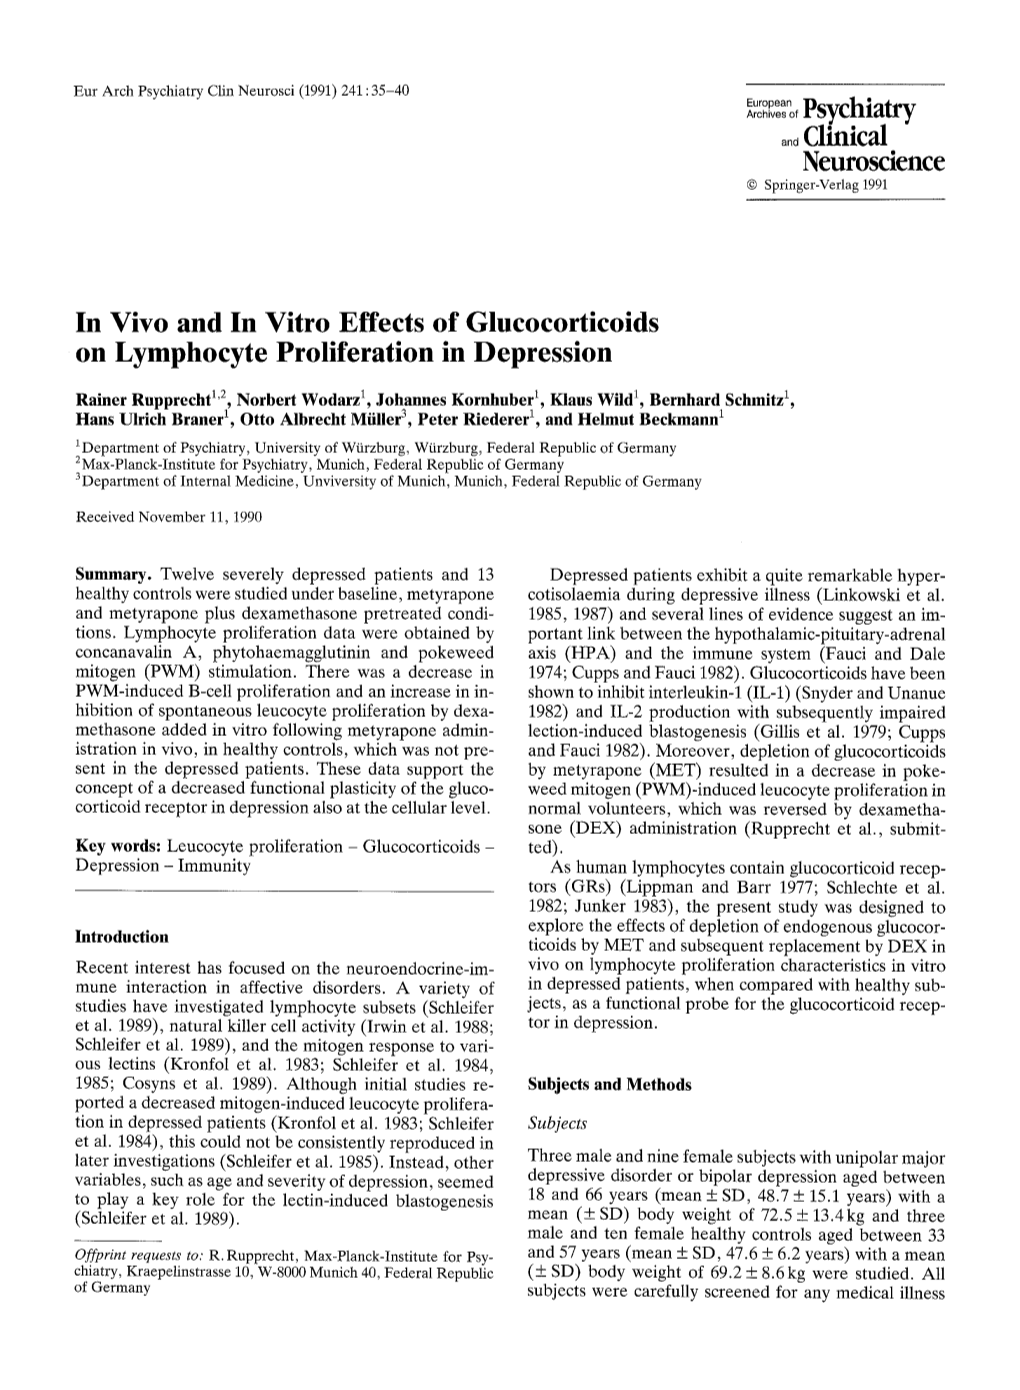 In Vivo and in Vitro Effects of Glucocorticoids on Lymphocyte Proliferation in Depression